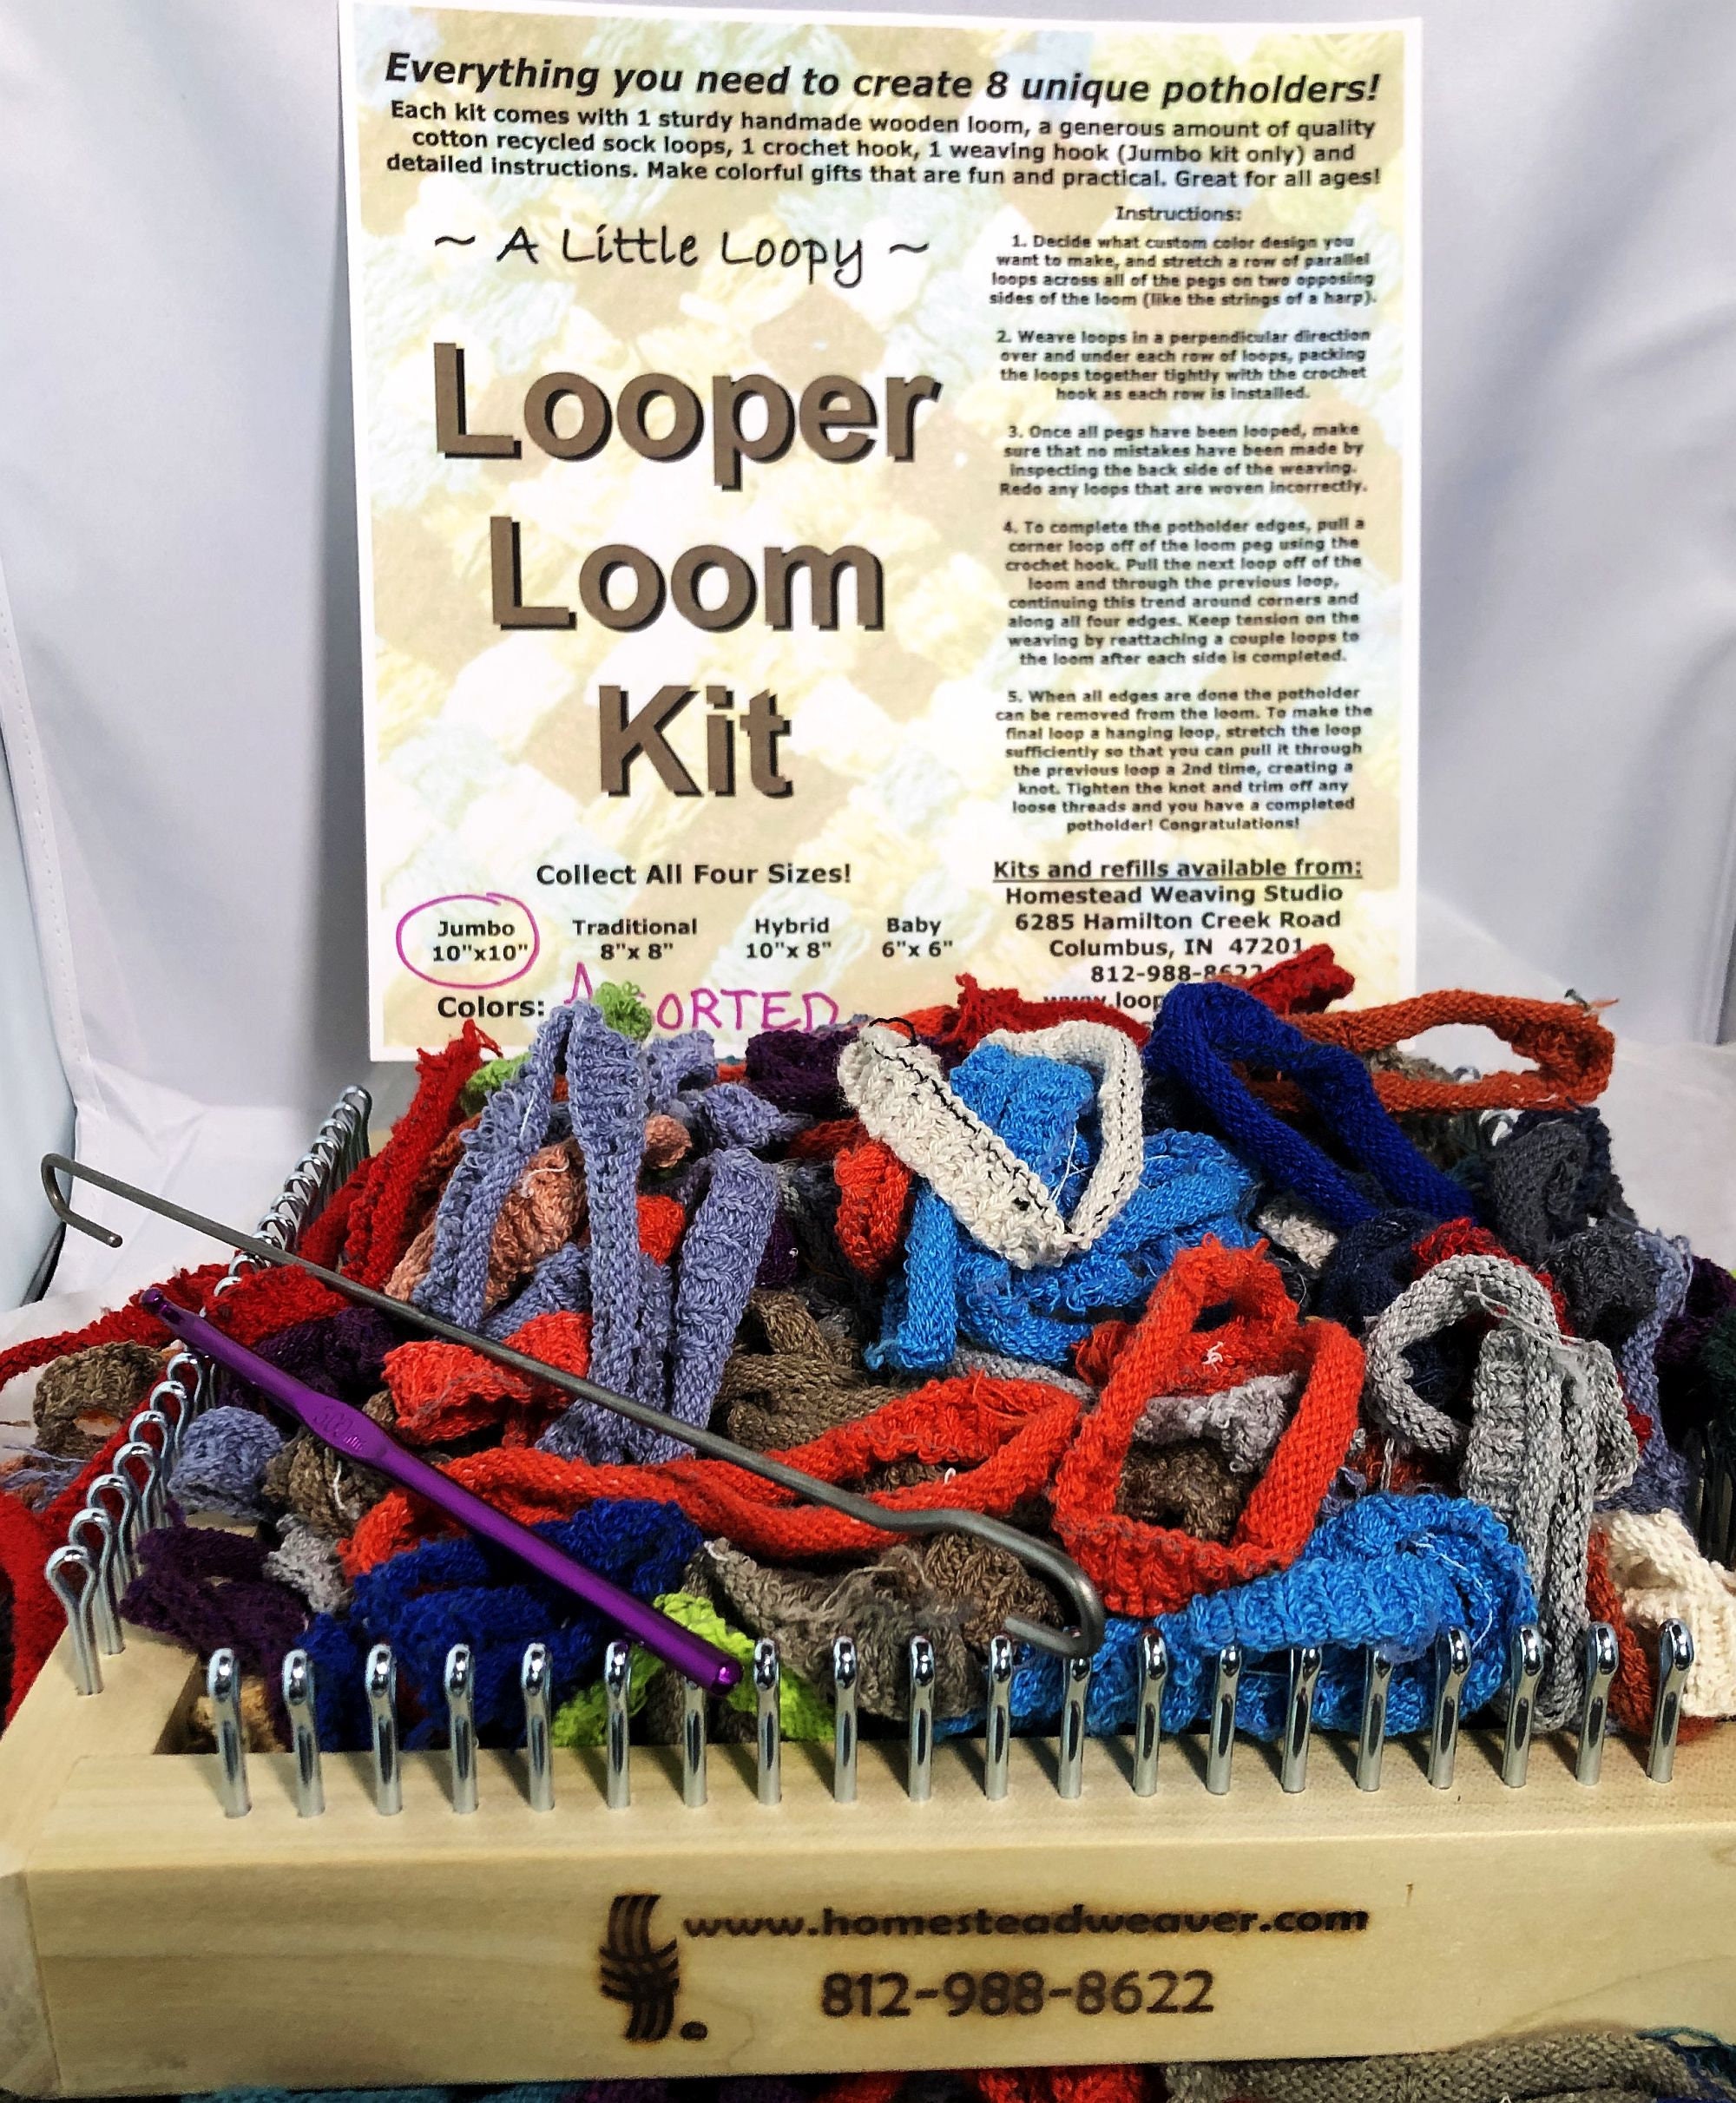 Potholder loom kits, wood with colorful cotton blend loops, 4